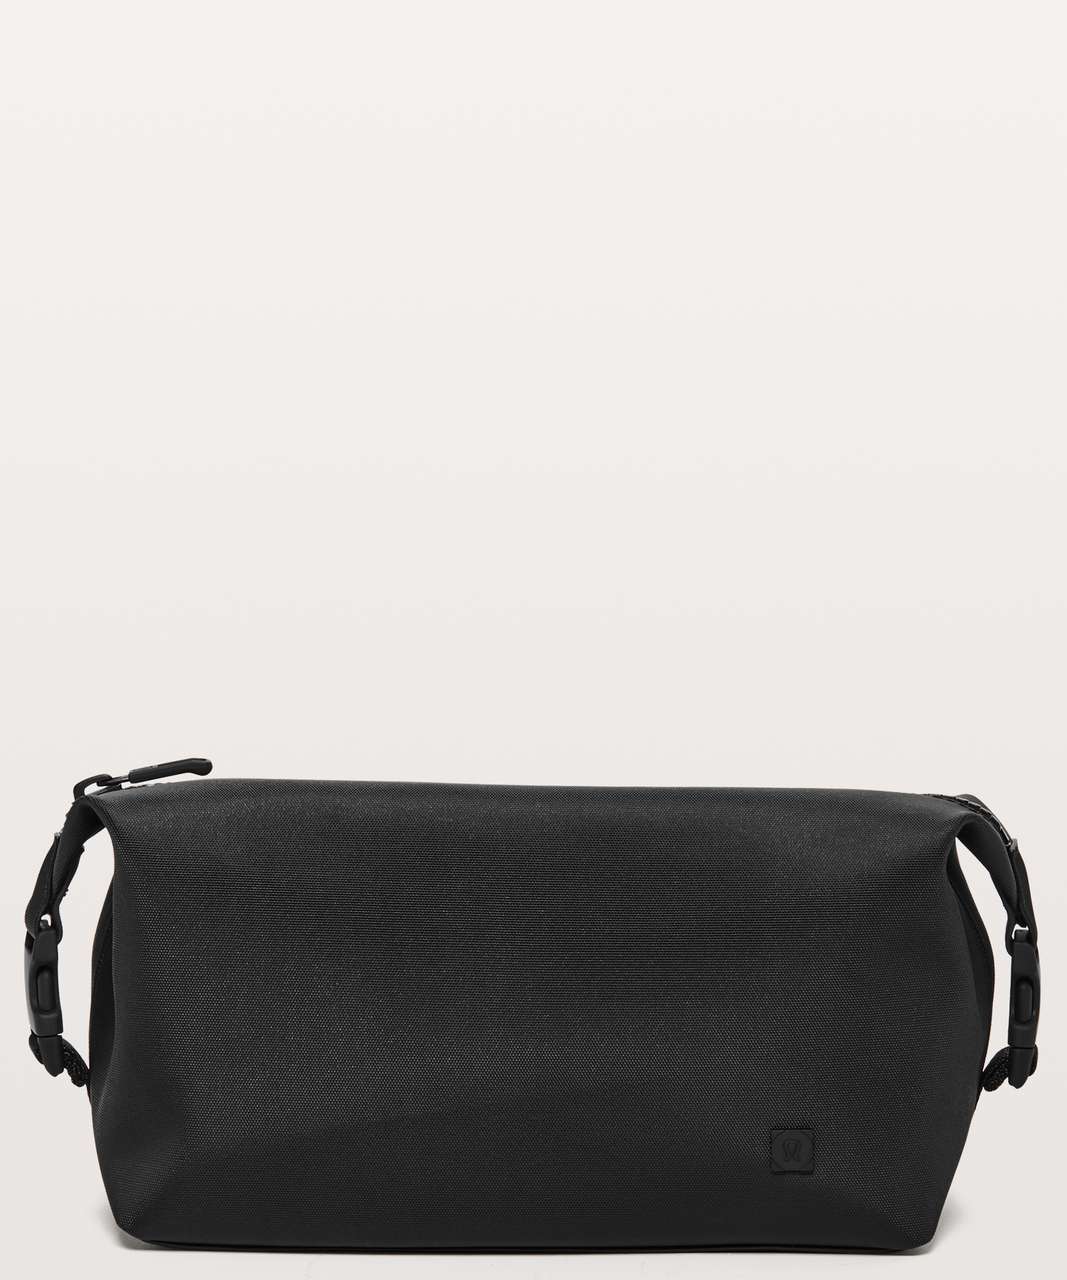 Lululemon Command The Day Kit *5L - Black (First Release)